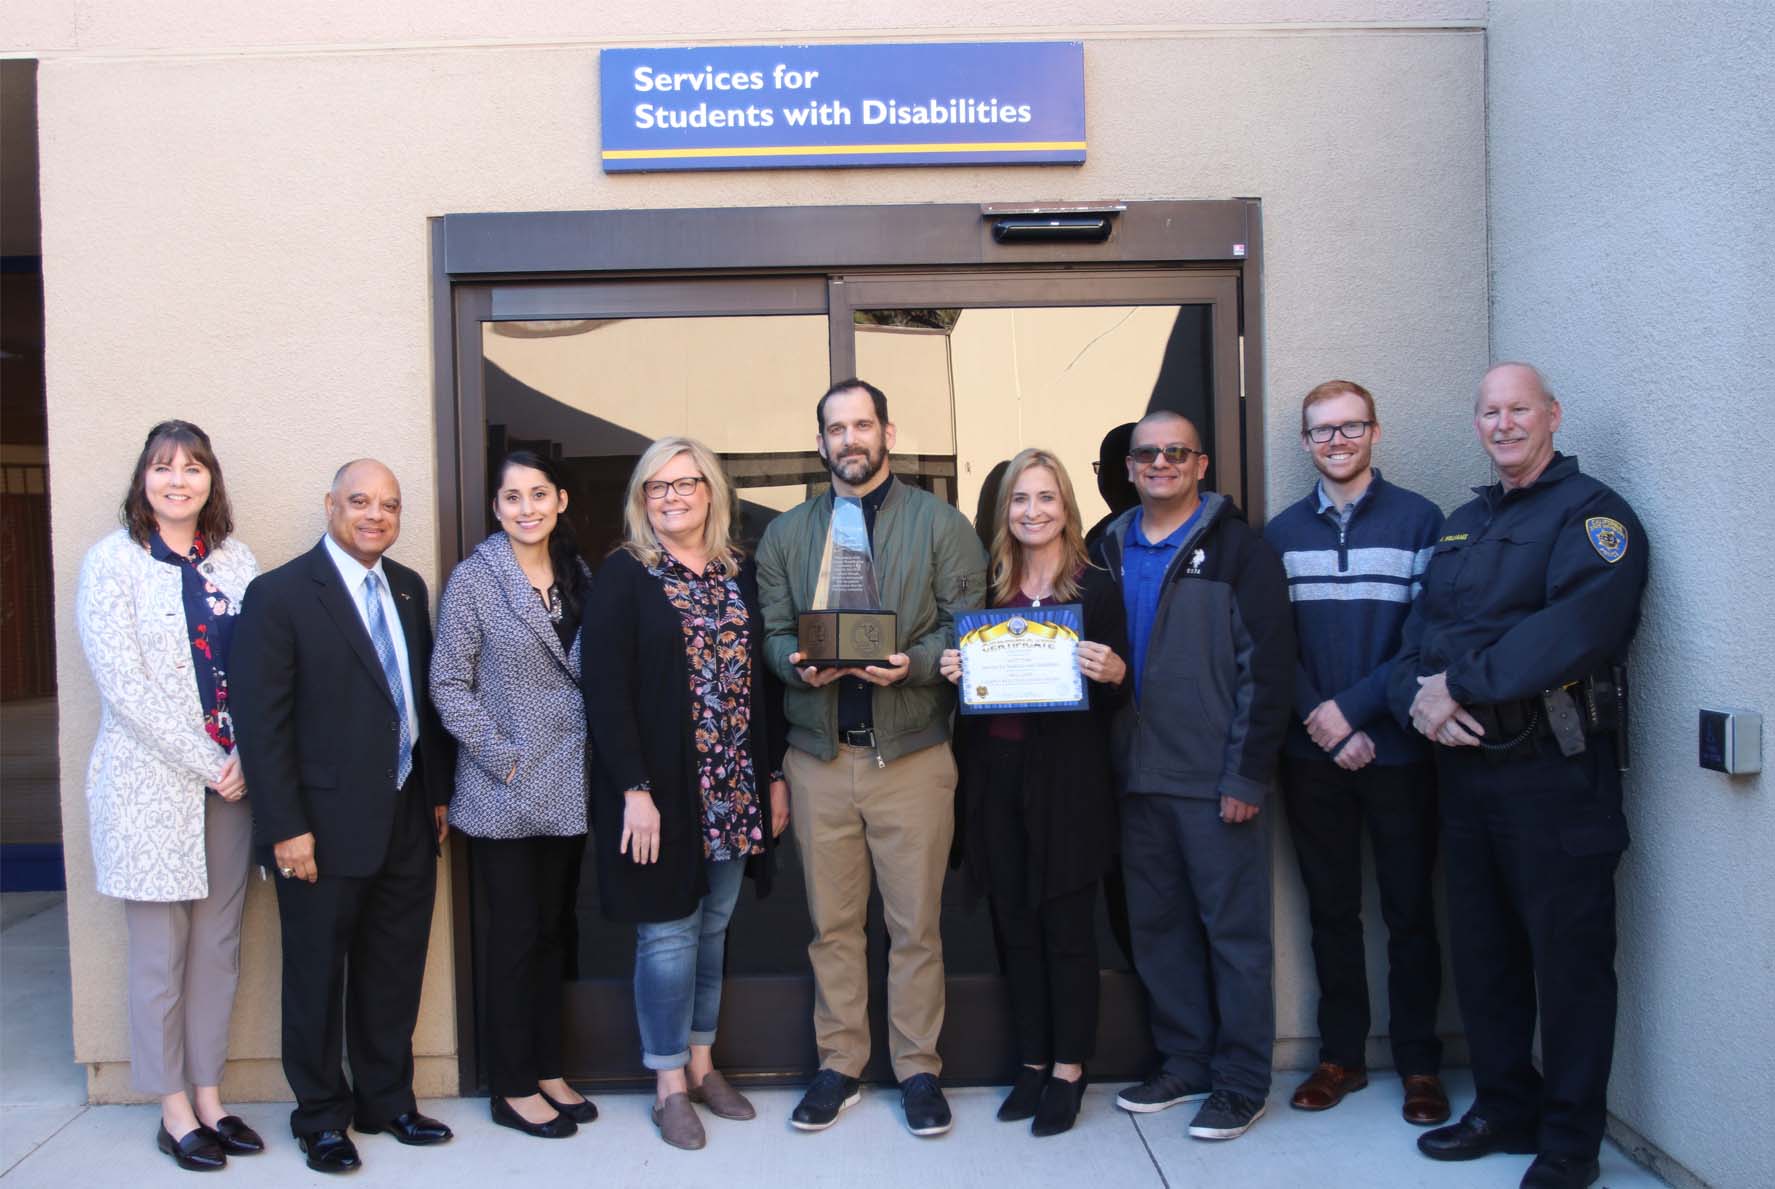 Services for Students with Disabilities recieveing Most Beautiful Area on Campus award